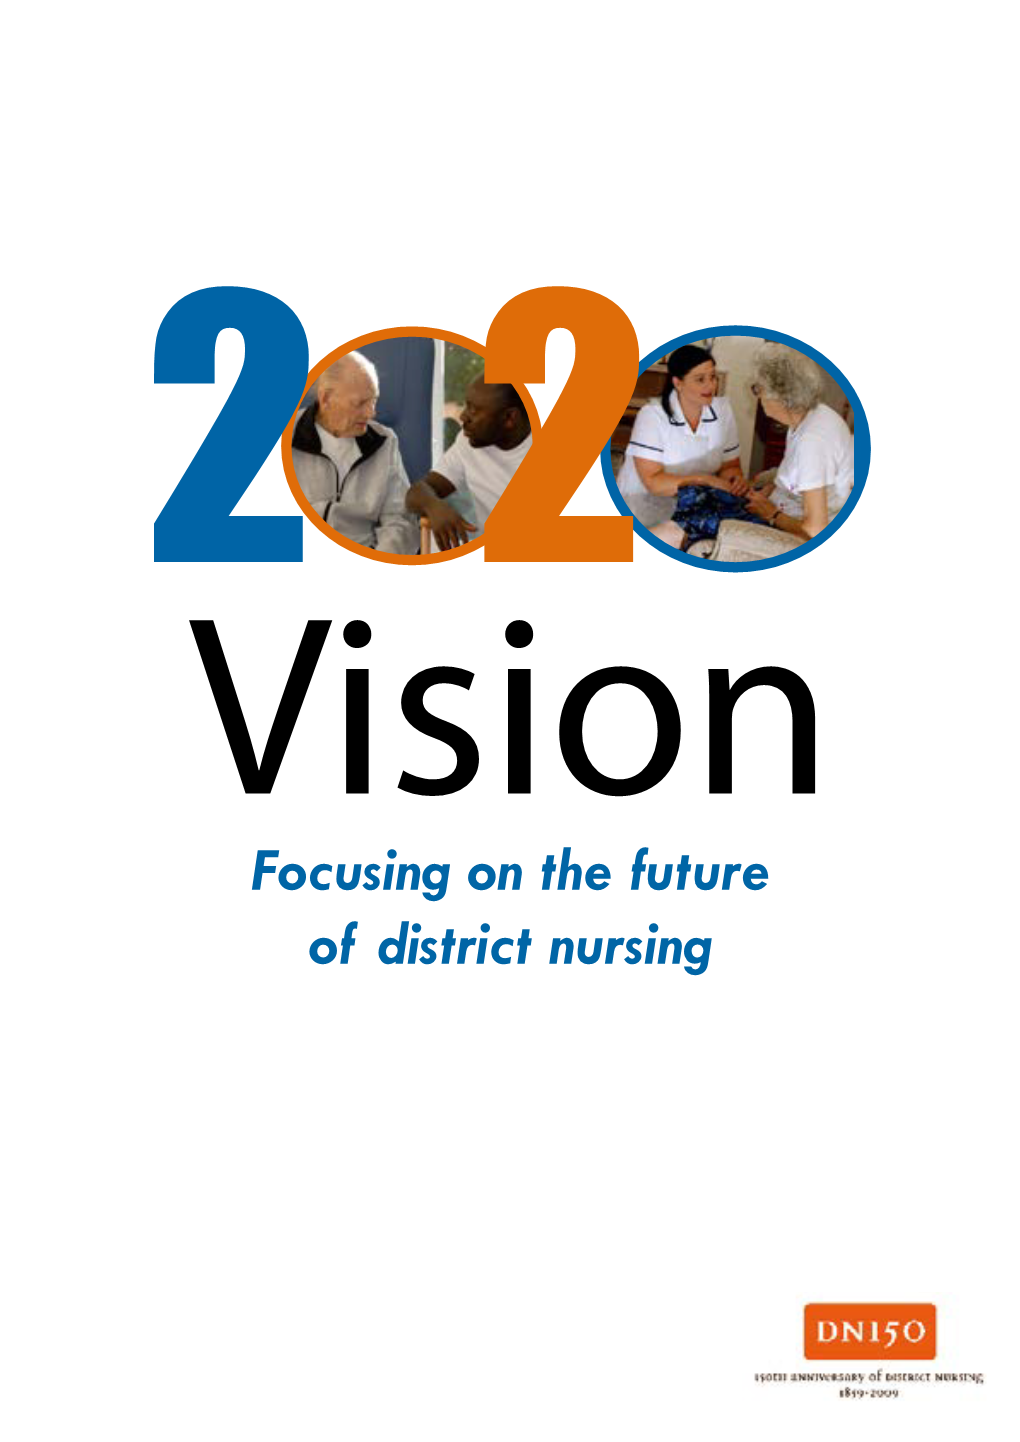 2020 Vision: Focusing on the Future of District Nursing